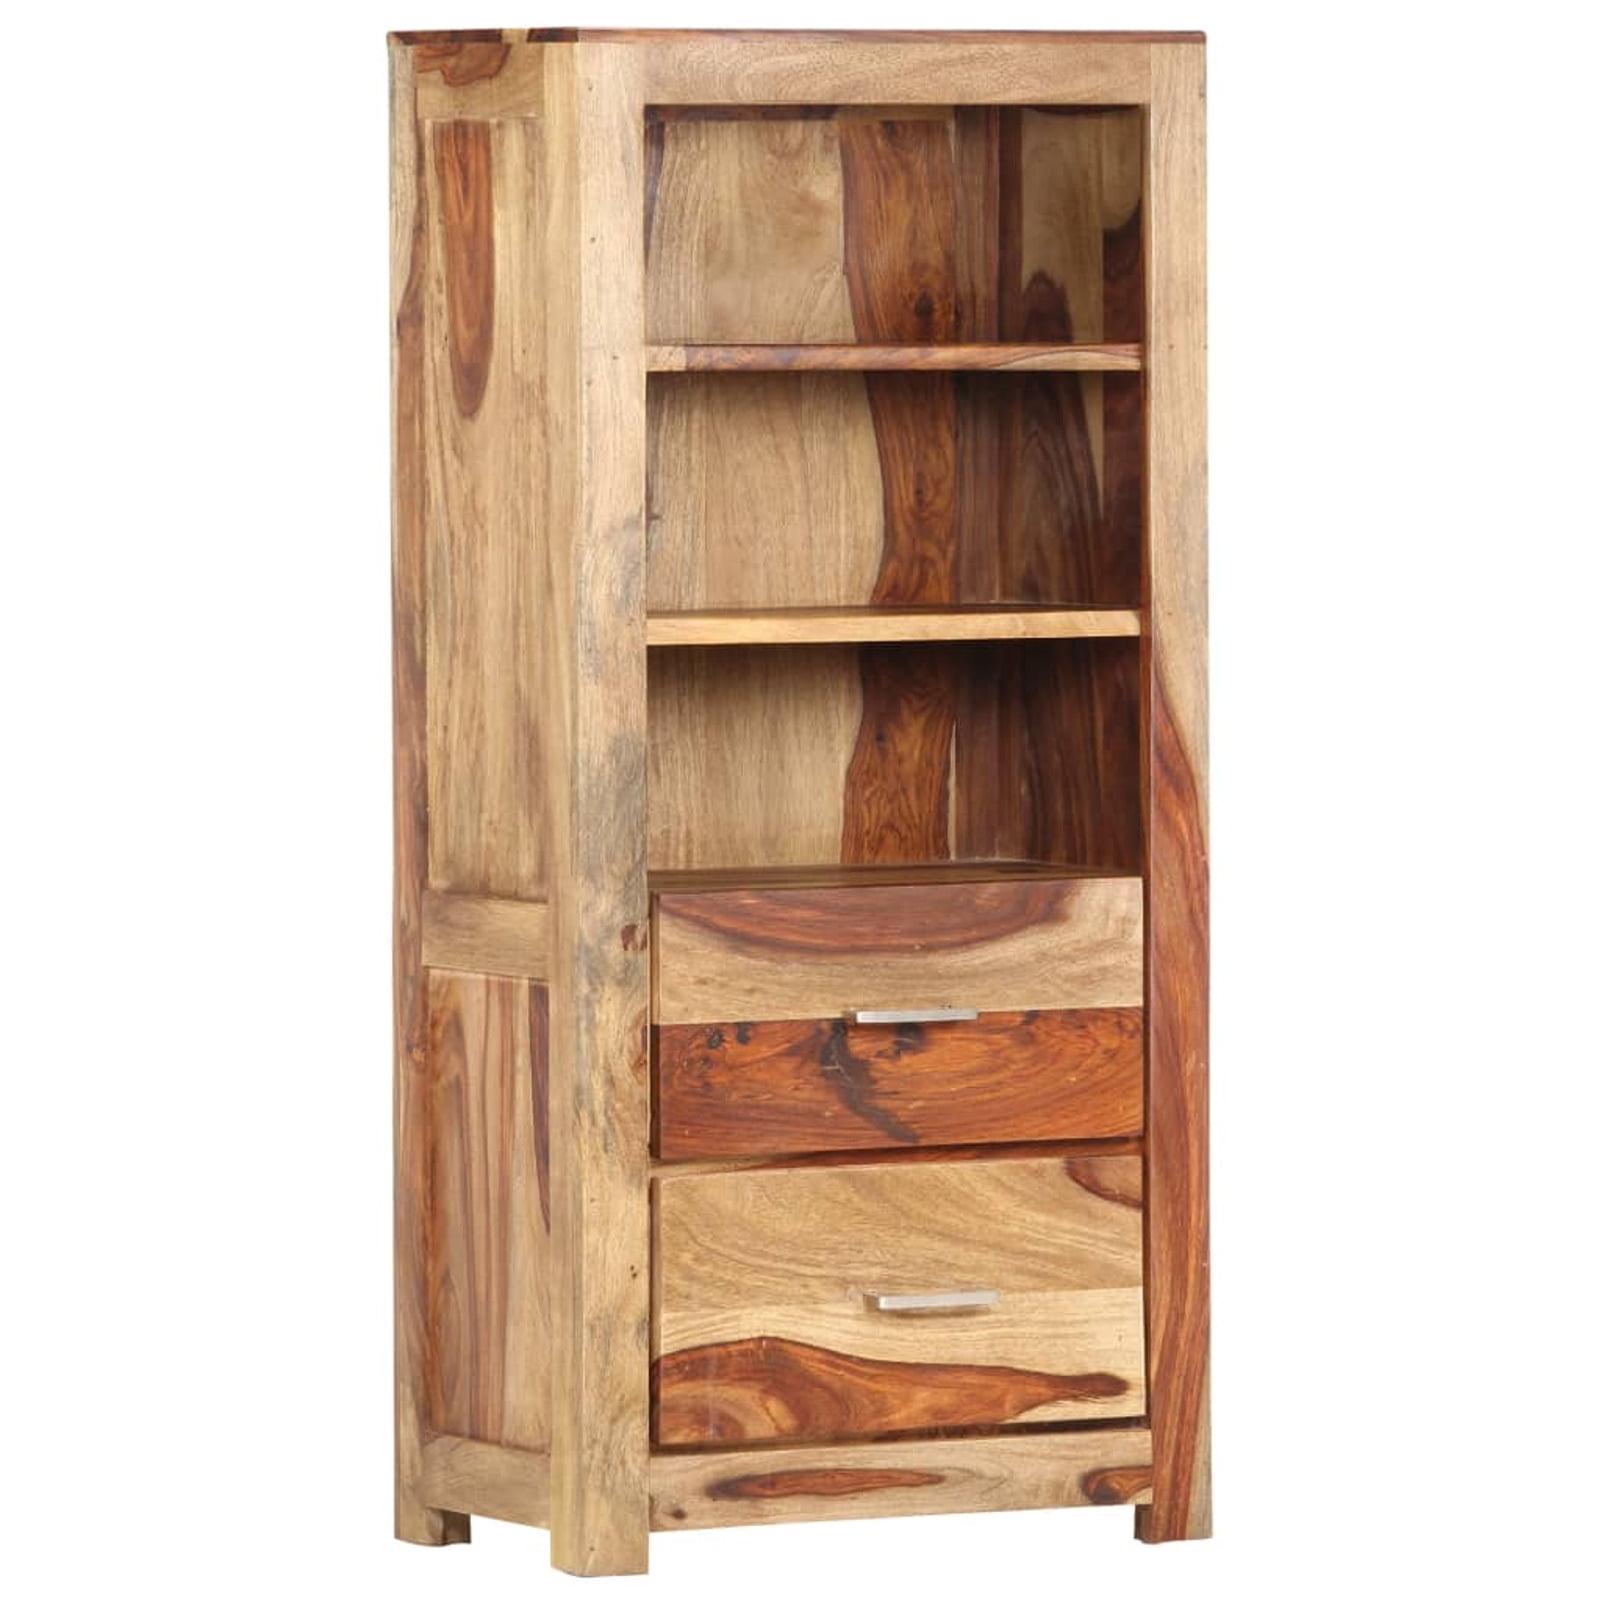 Rustic Sheesham Wood Highboard with Storage Compartments